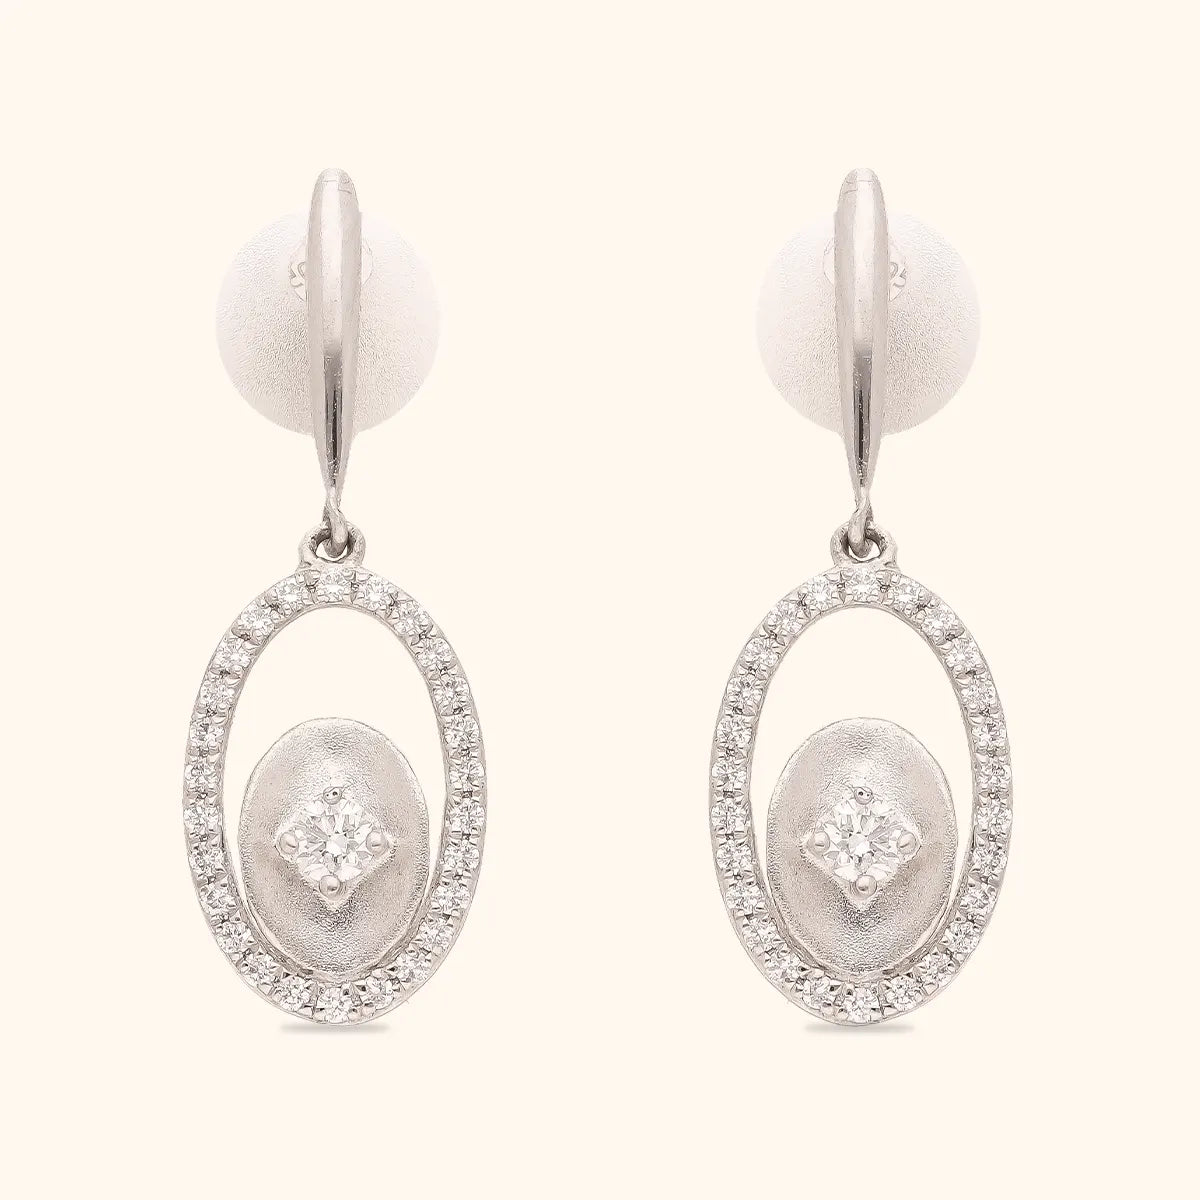 Shop Platinum Earrings at Offer Price  Candere by Kalyan Jewellers